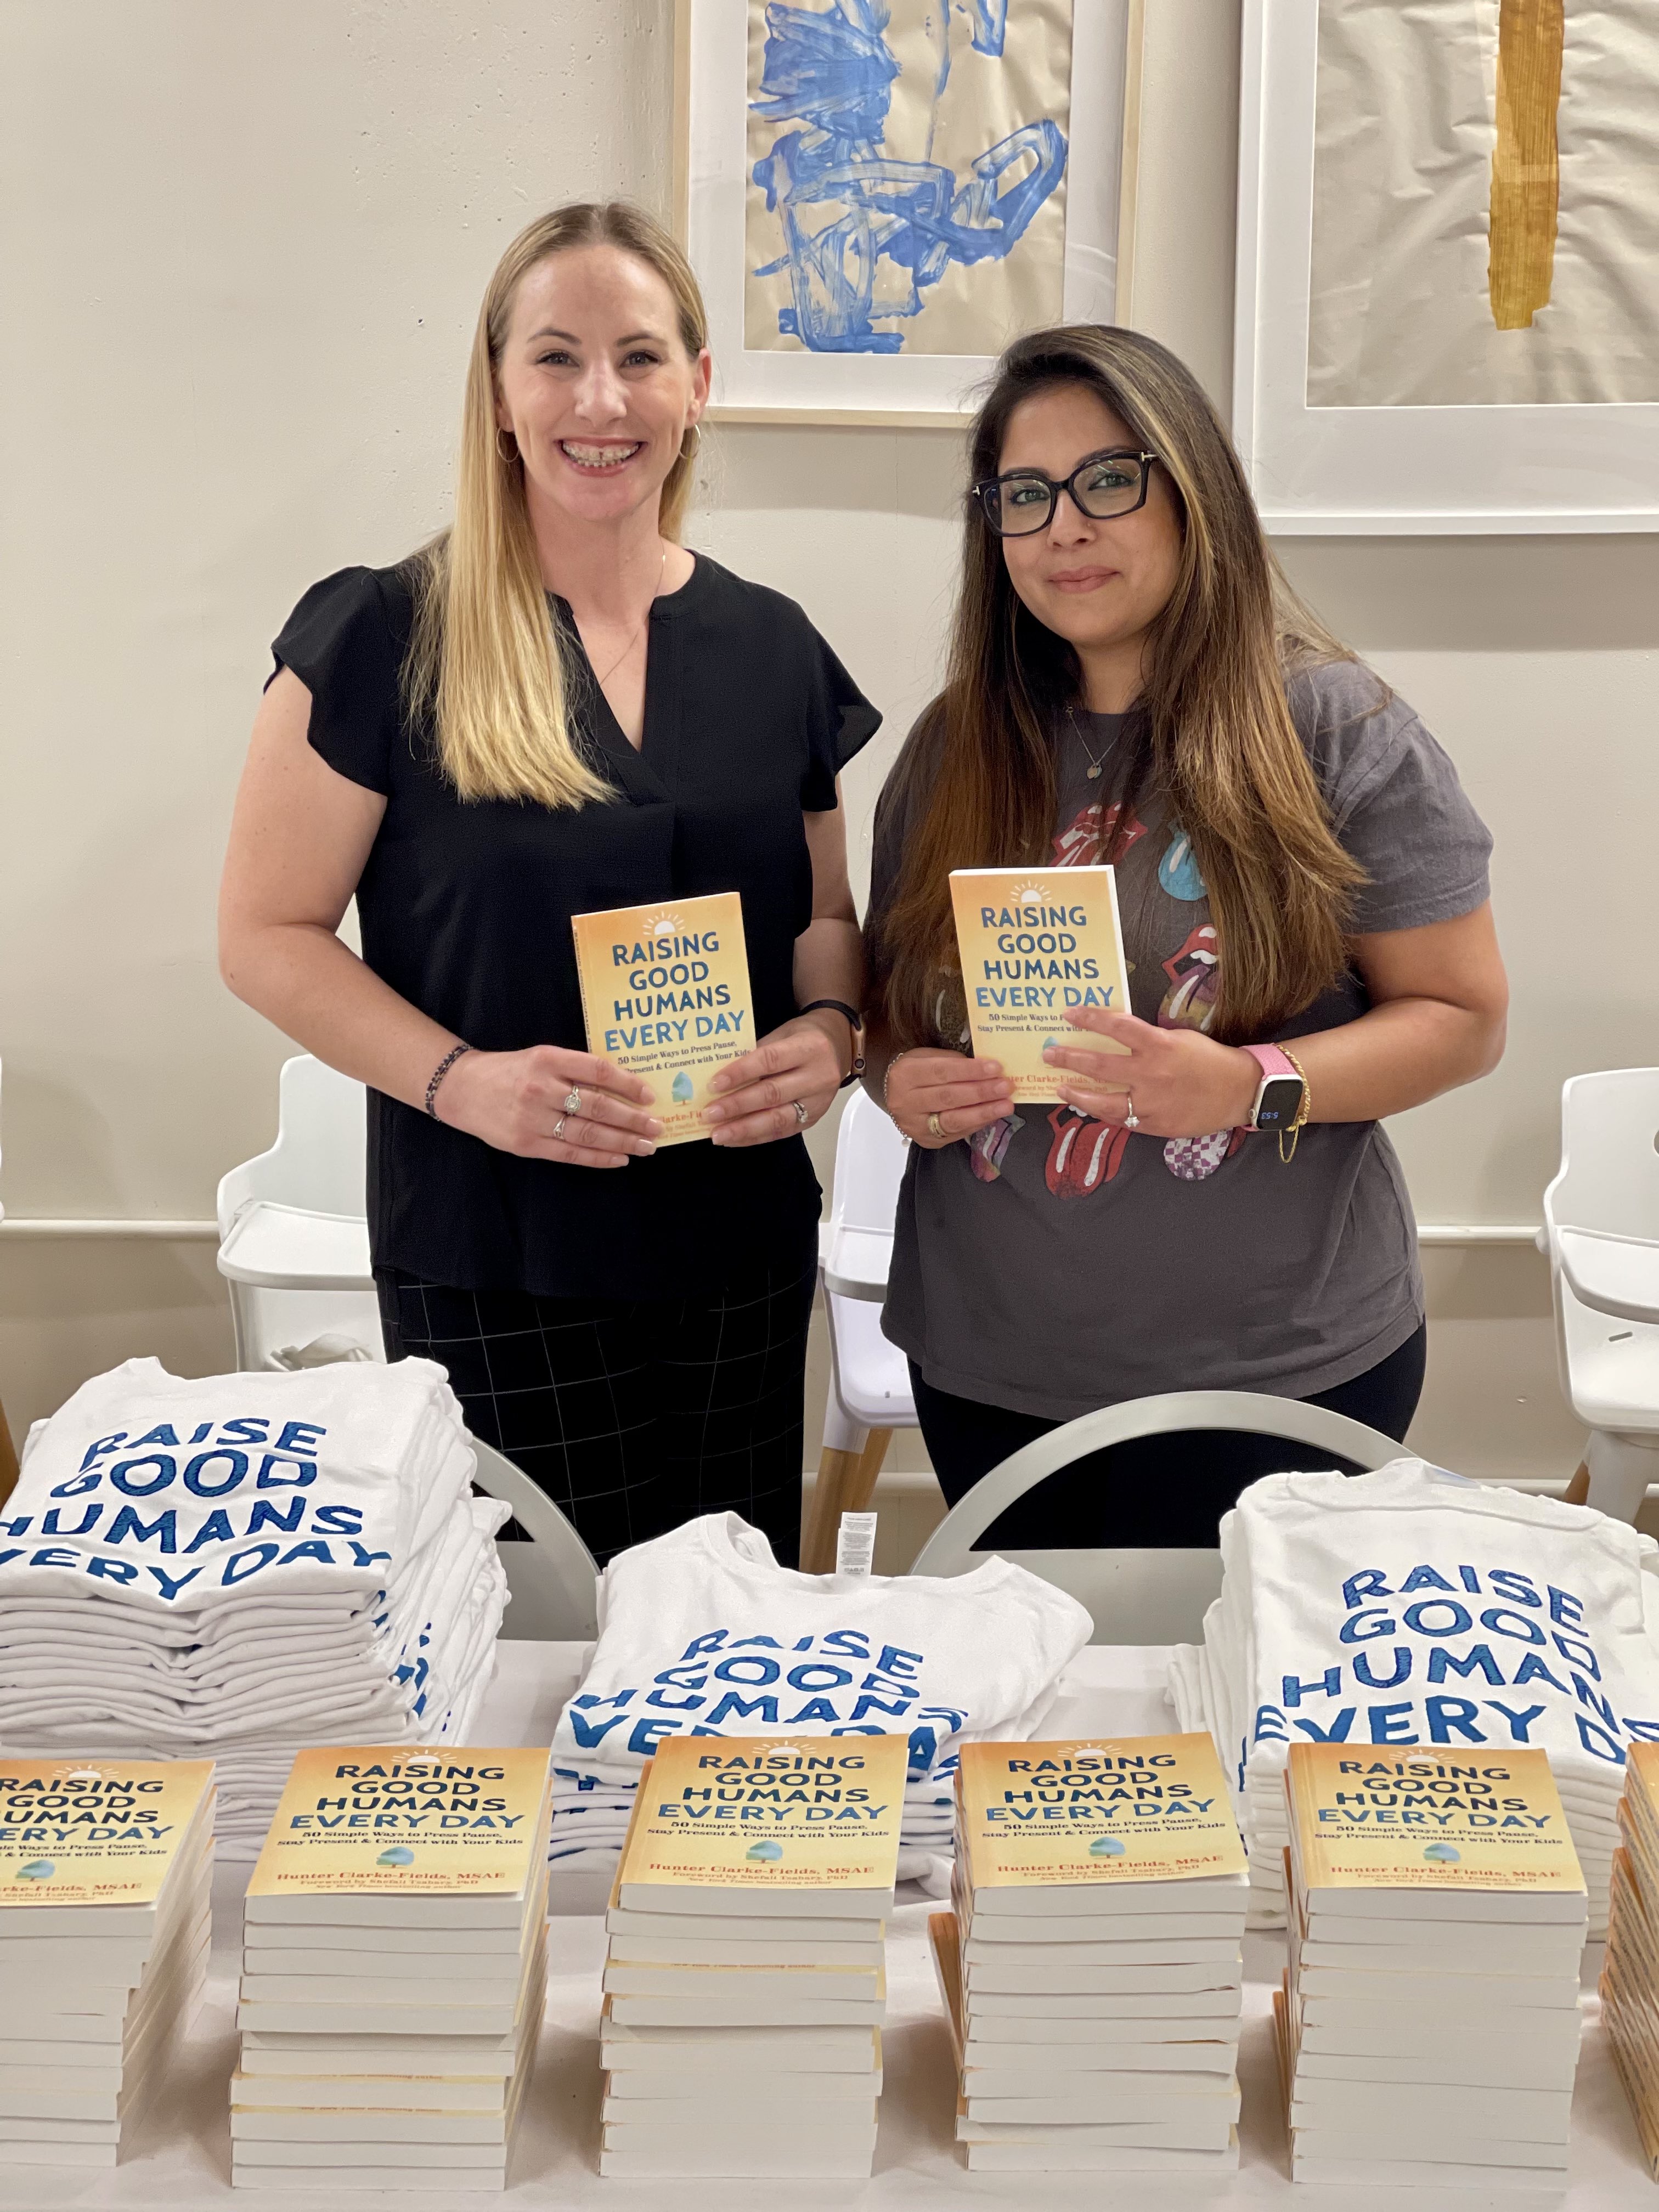 “Raising Good Humans Every Day - 50 Simple Ways to Press Pause, Stay Present and Connect with your Kids” book launch party at Cocoon NYC giveaways included autographed books and t-shirts for guests.